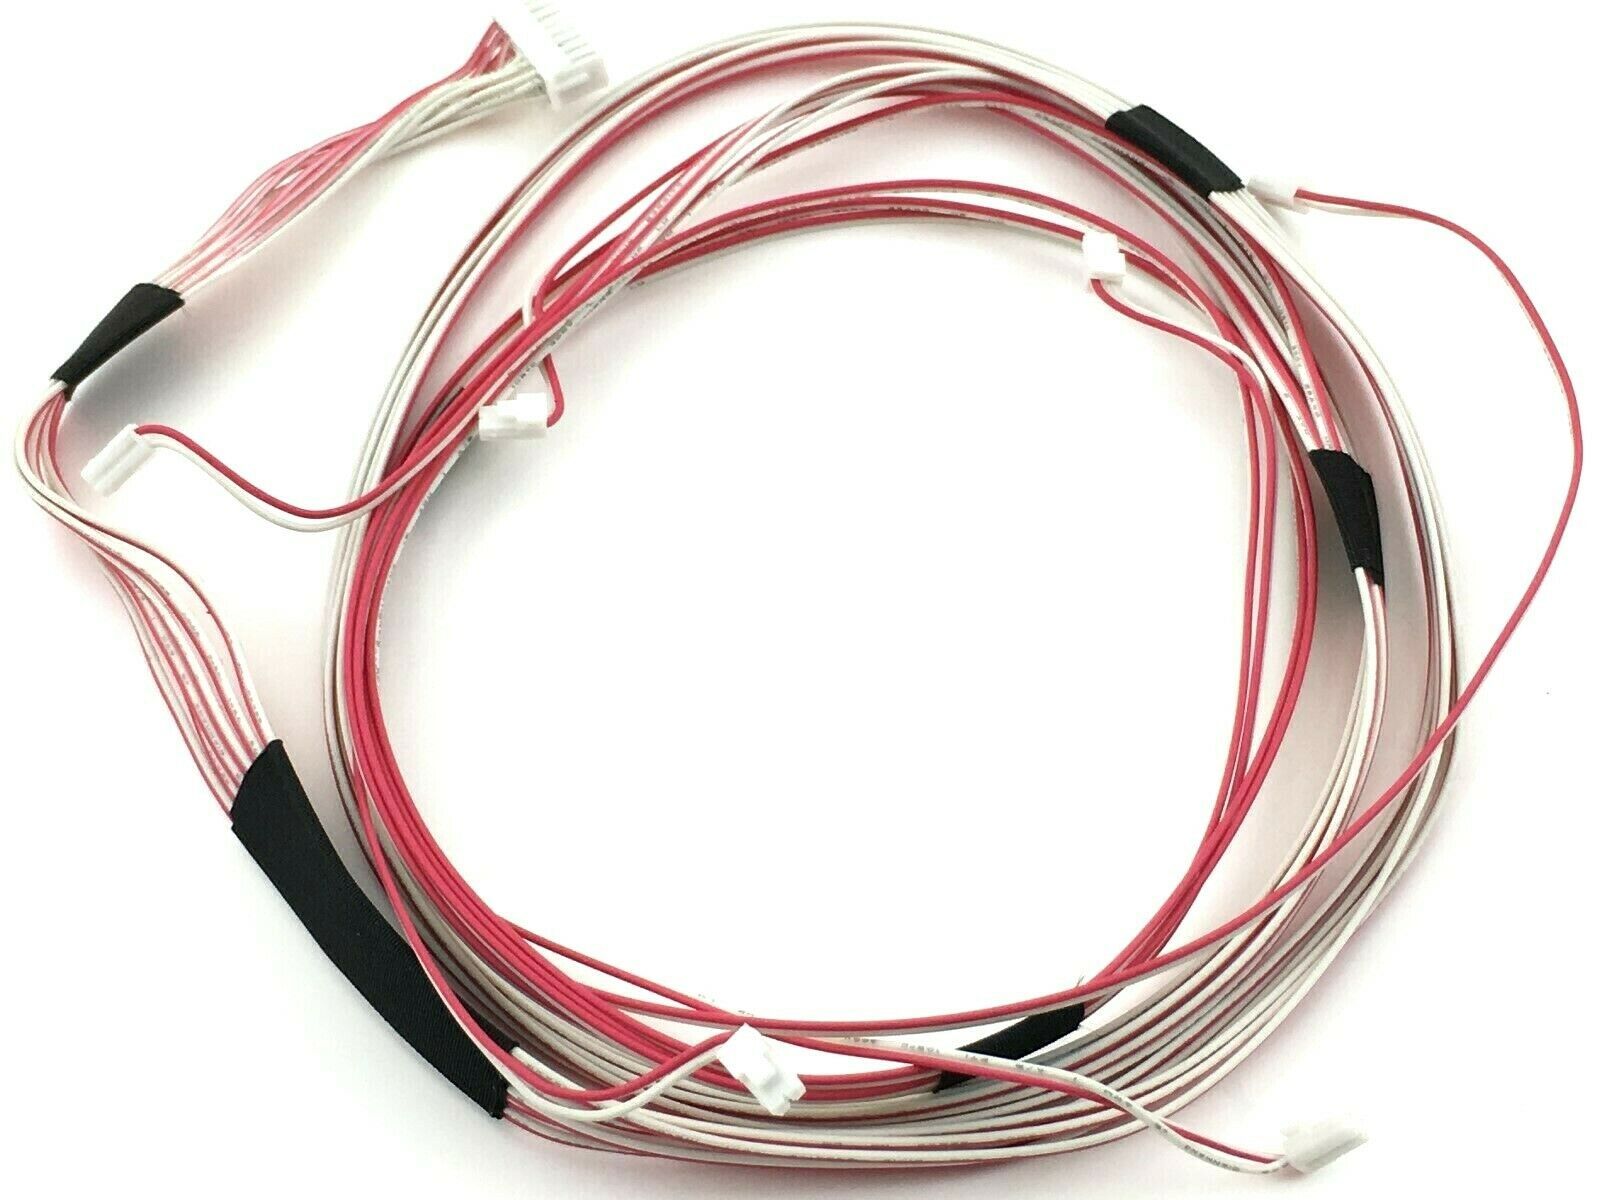 Primary image for Vizio V655-G9 Cable Wire Replacement That Runs From Power Supply To Backlights